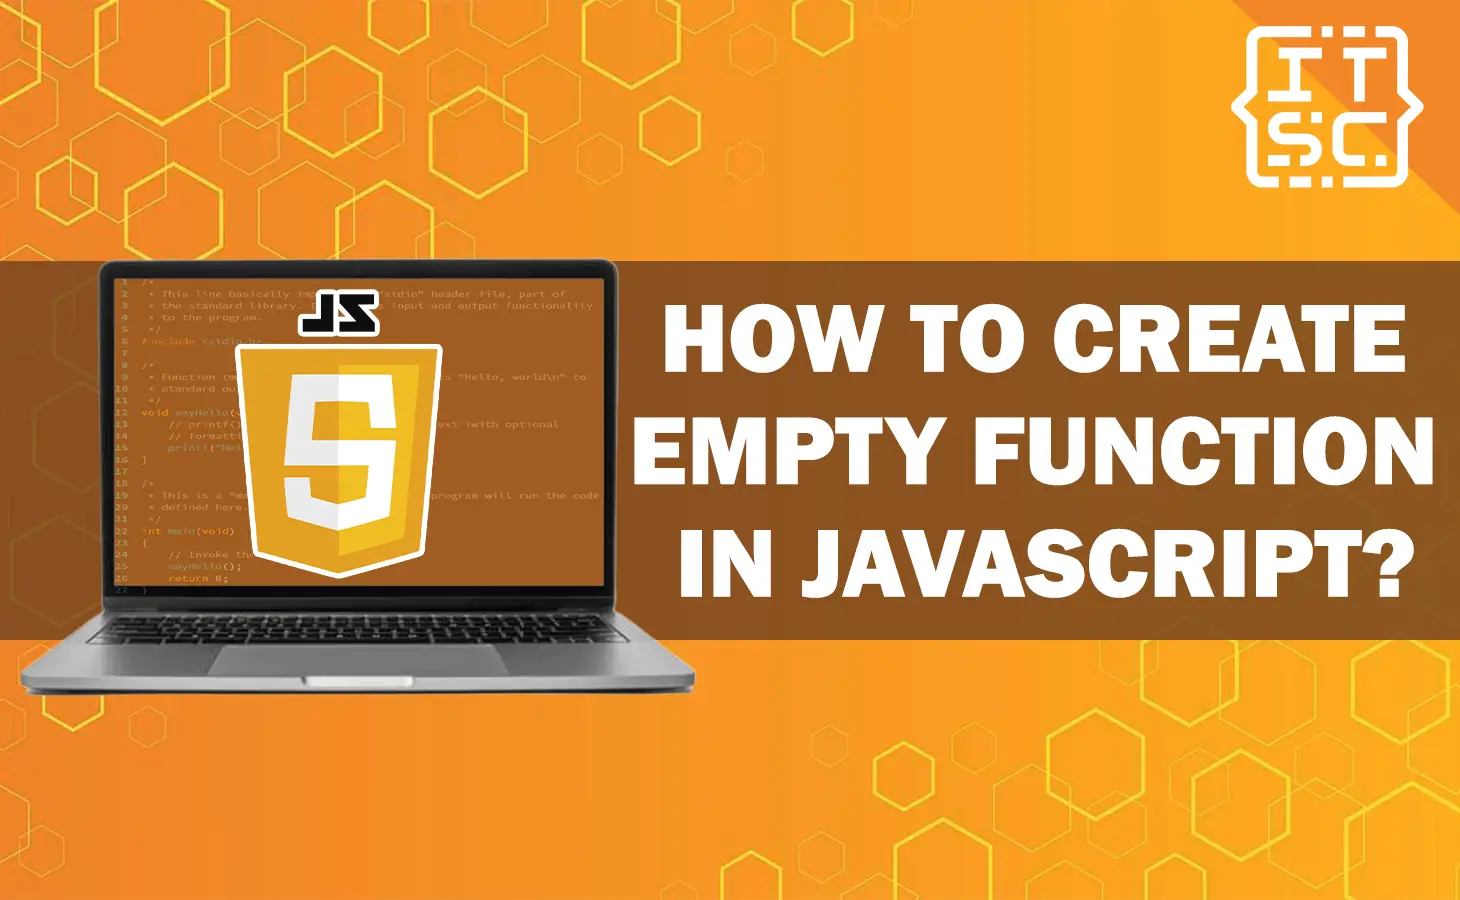 How to create empty function in JavaScript?